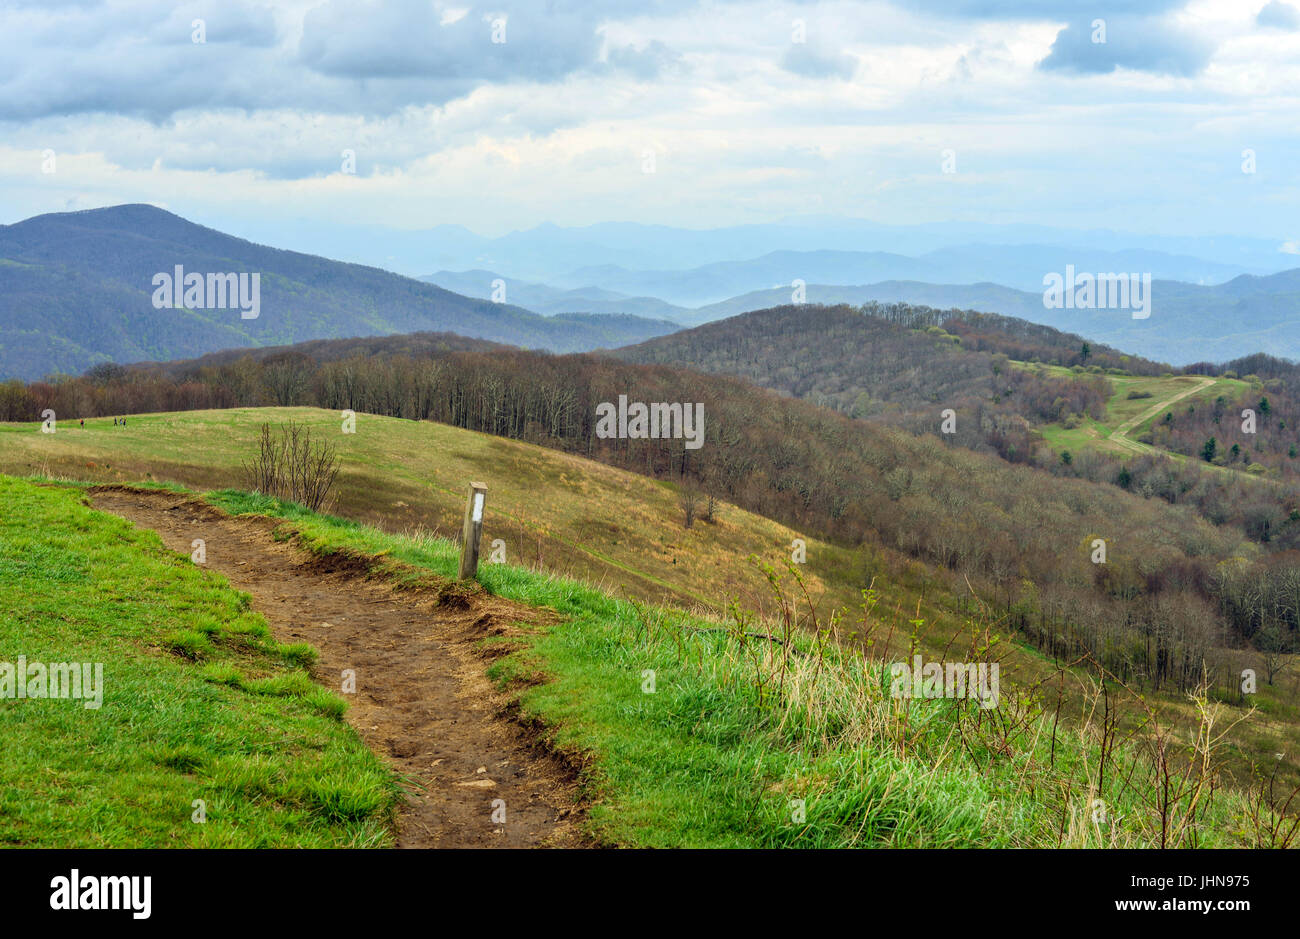 Appalachian Hiking trail crossing over Max Patch with the Appalachian Mountains in the distance. Stock Photo